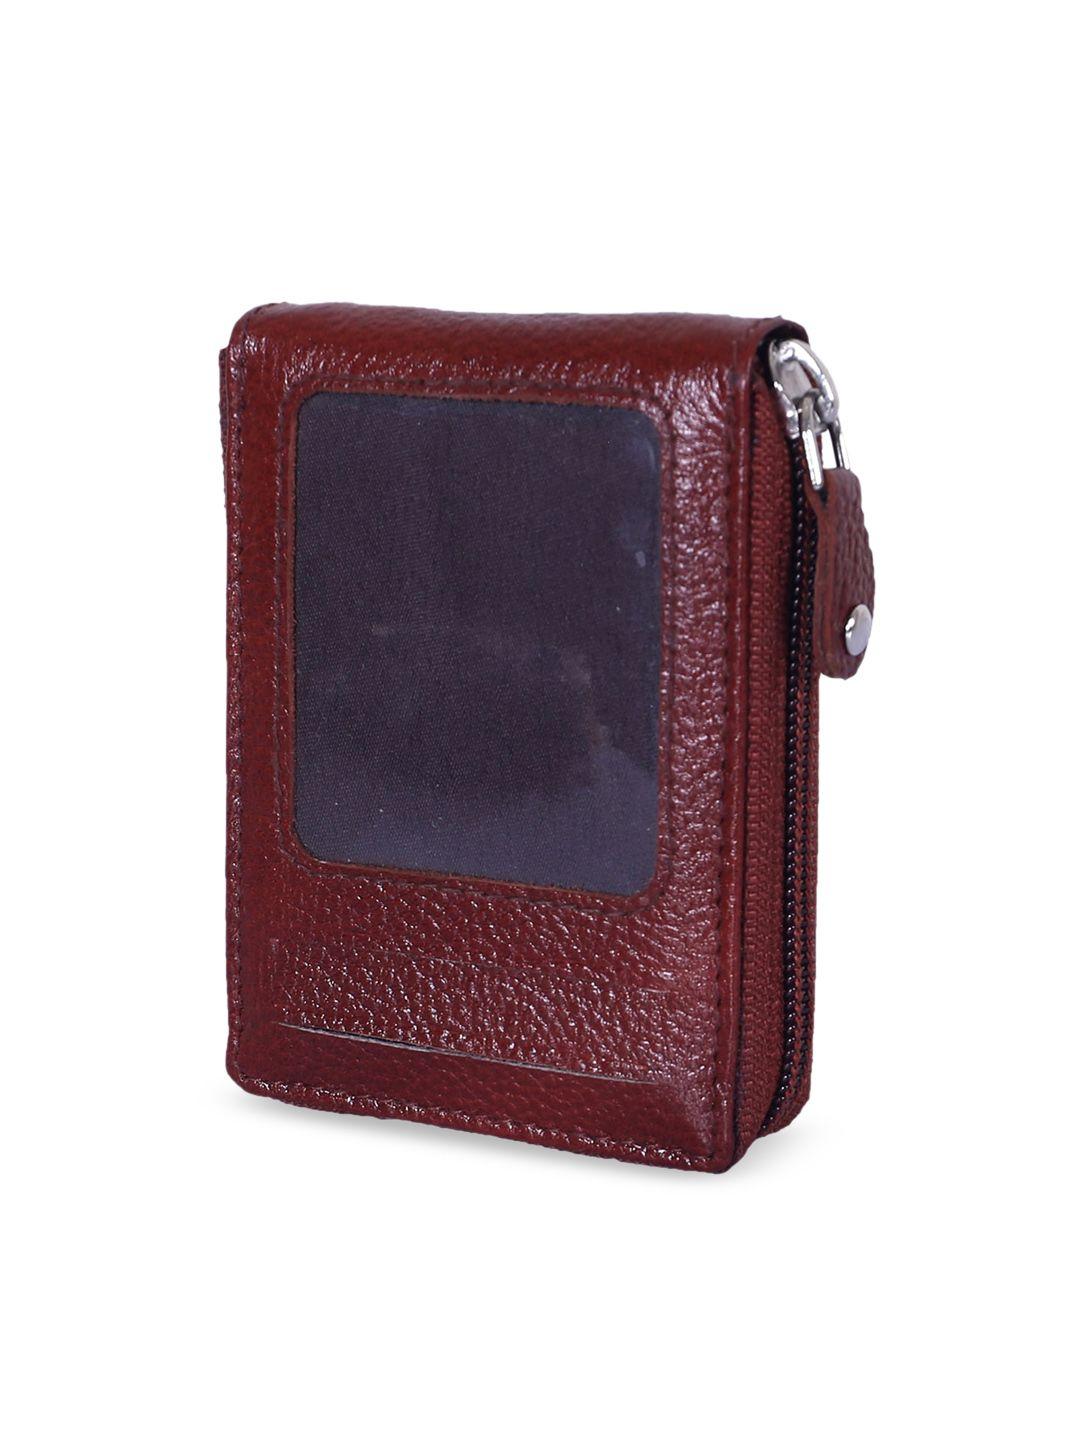 kuber industries adults brown soft leather zipper card holder wallet